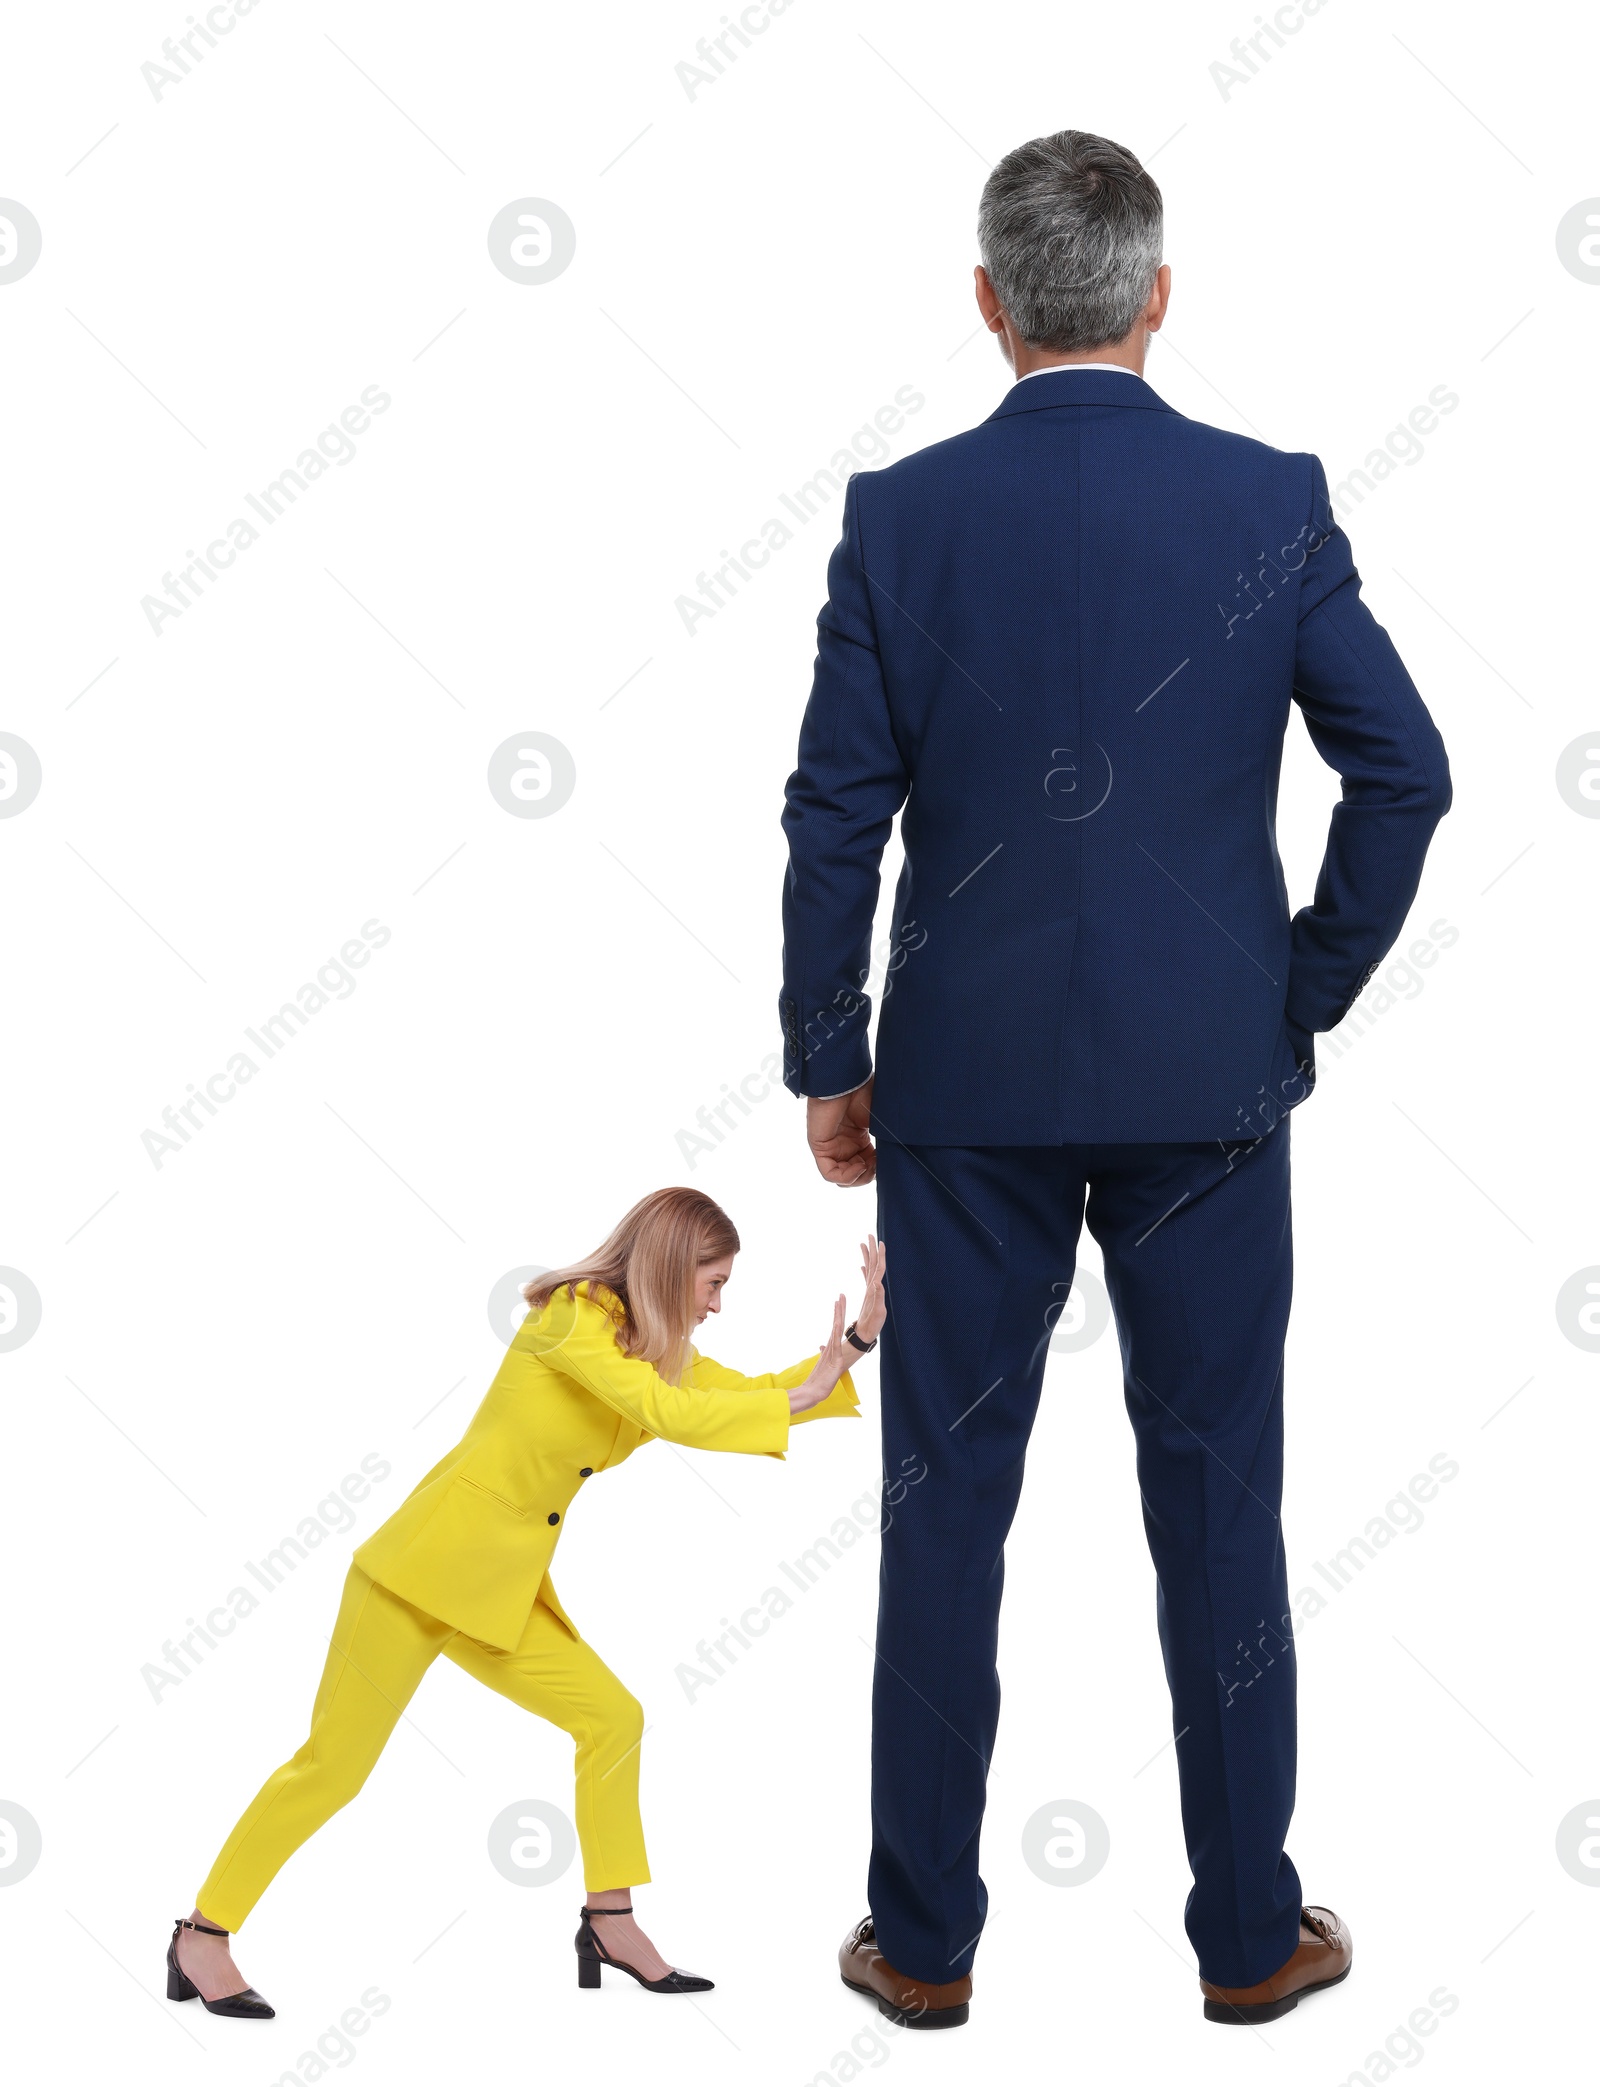 Image of Small woman pushing giant man on white background